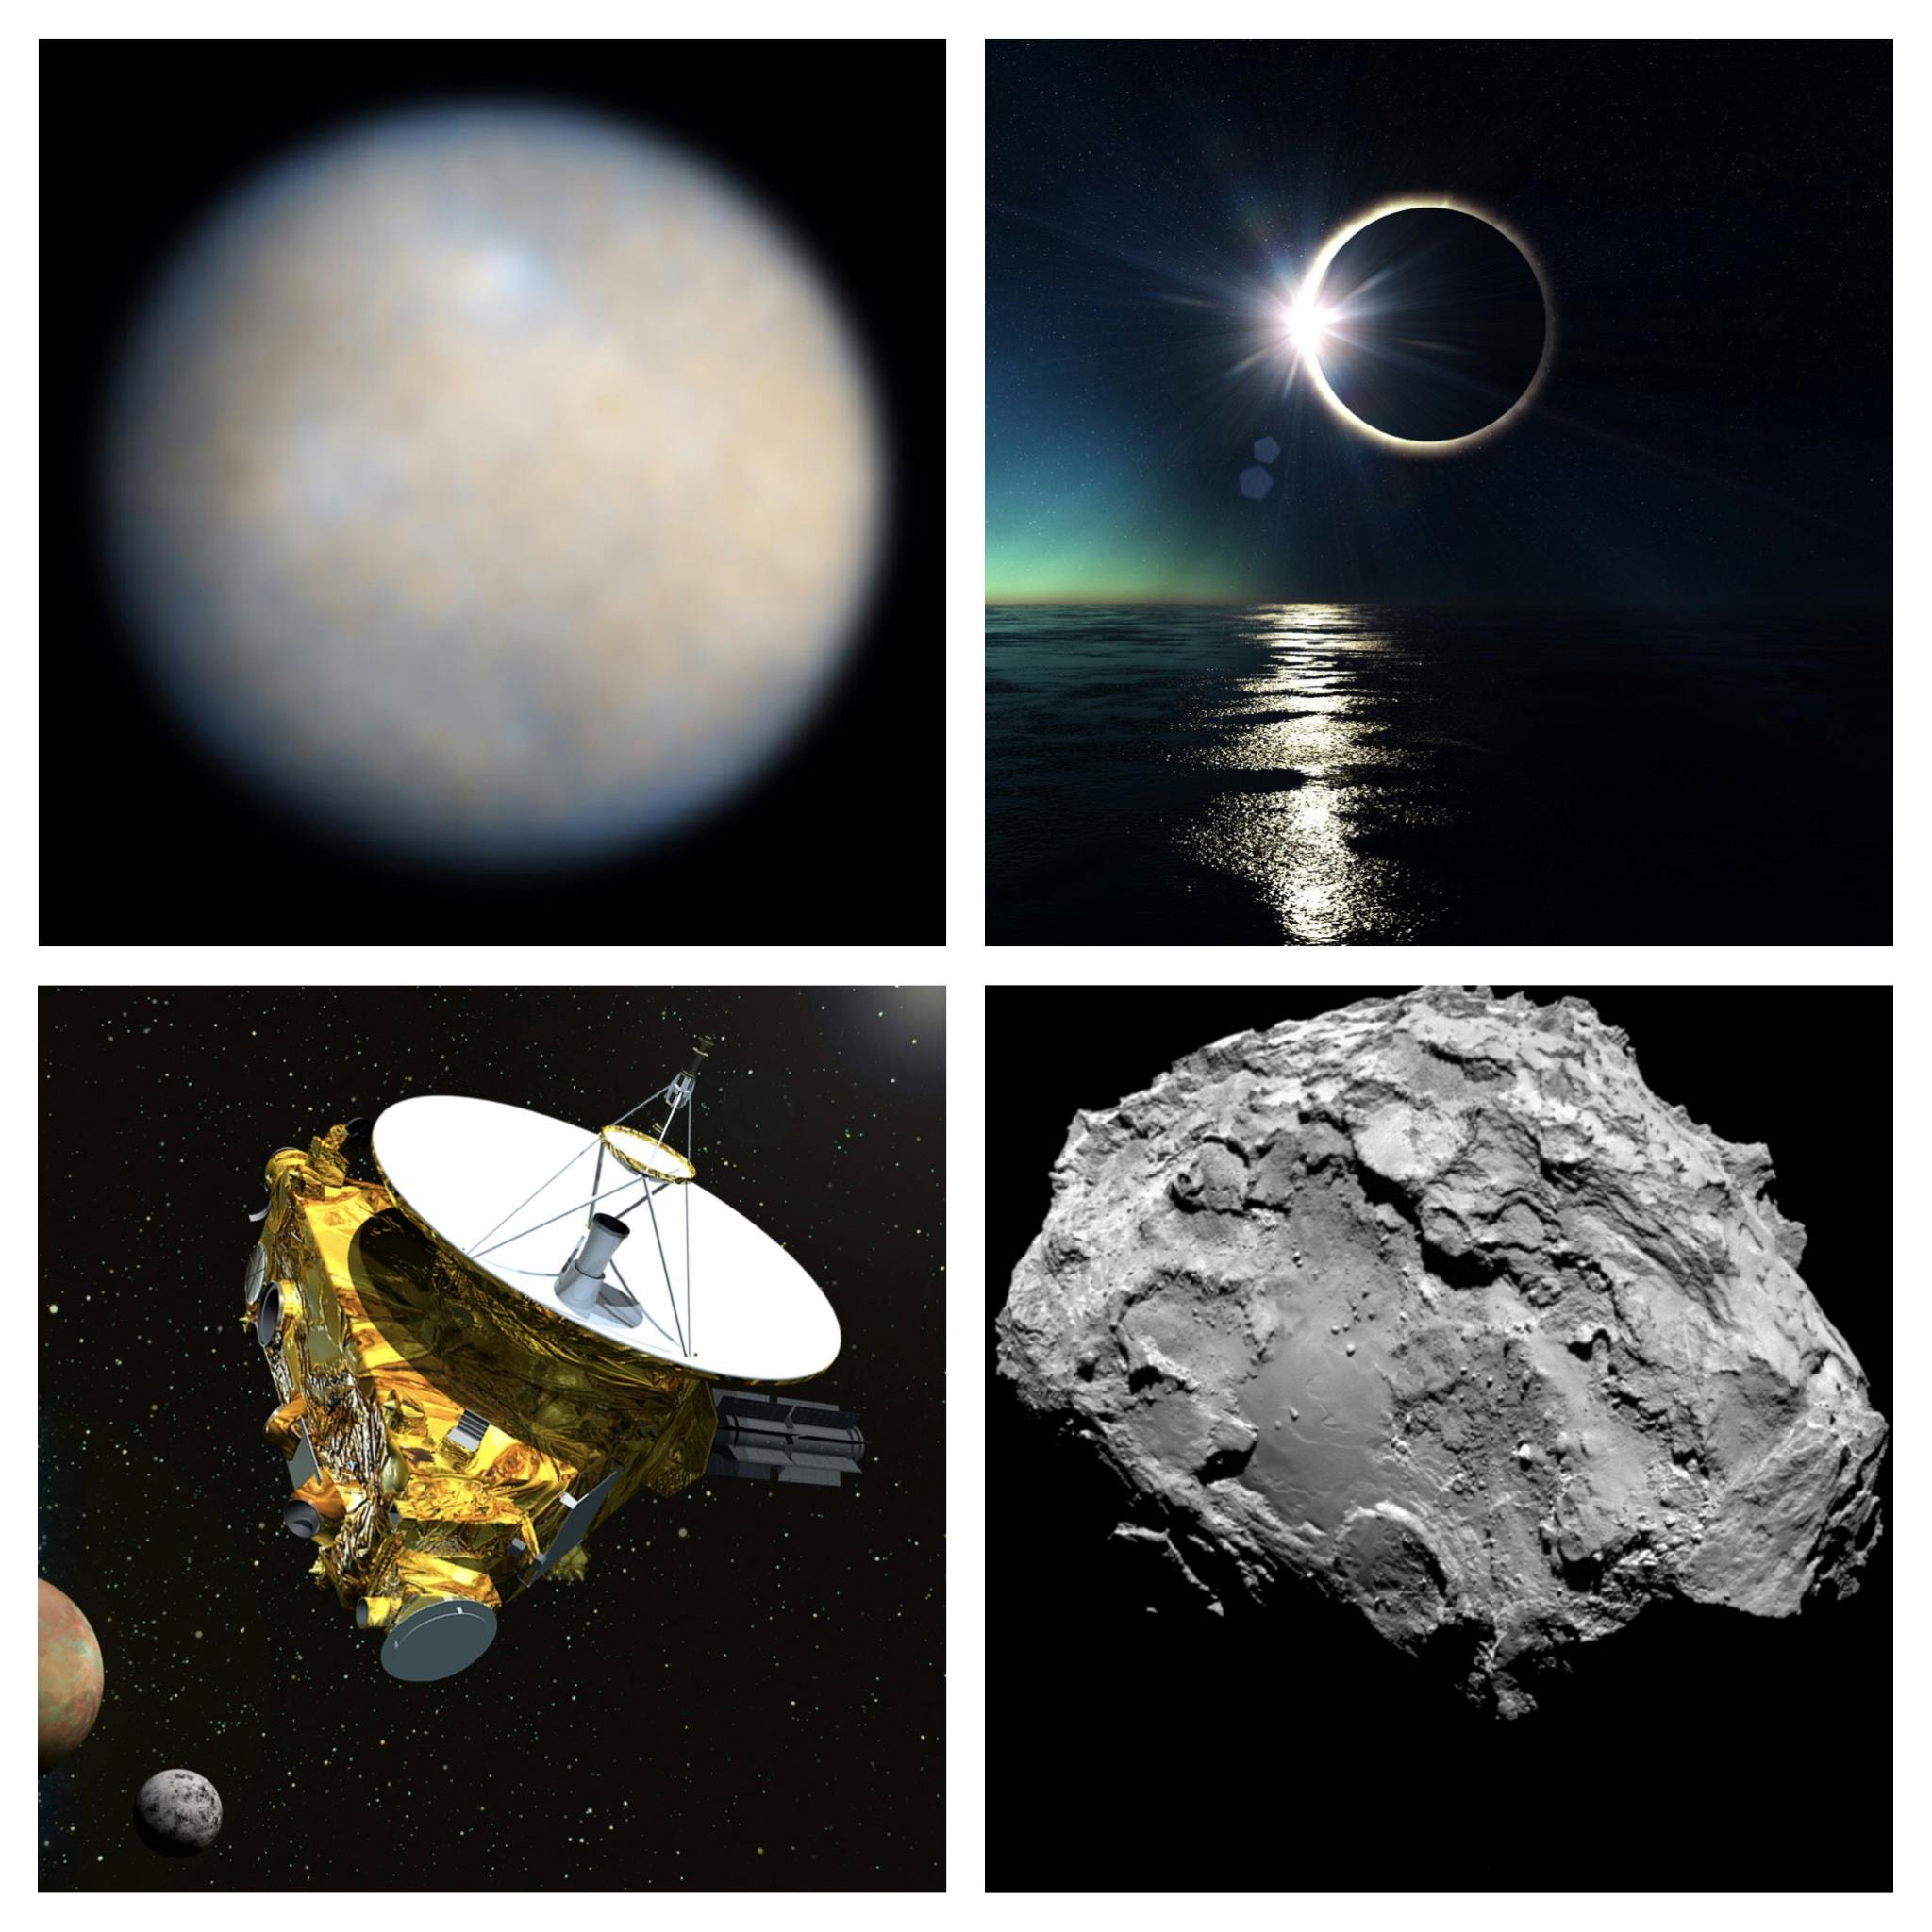 4 astronomical dates to look forward to in 2015